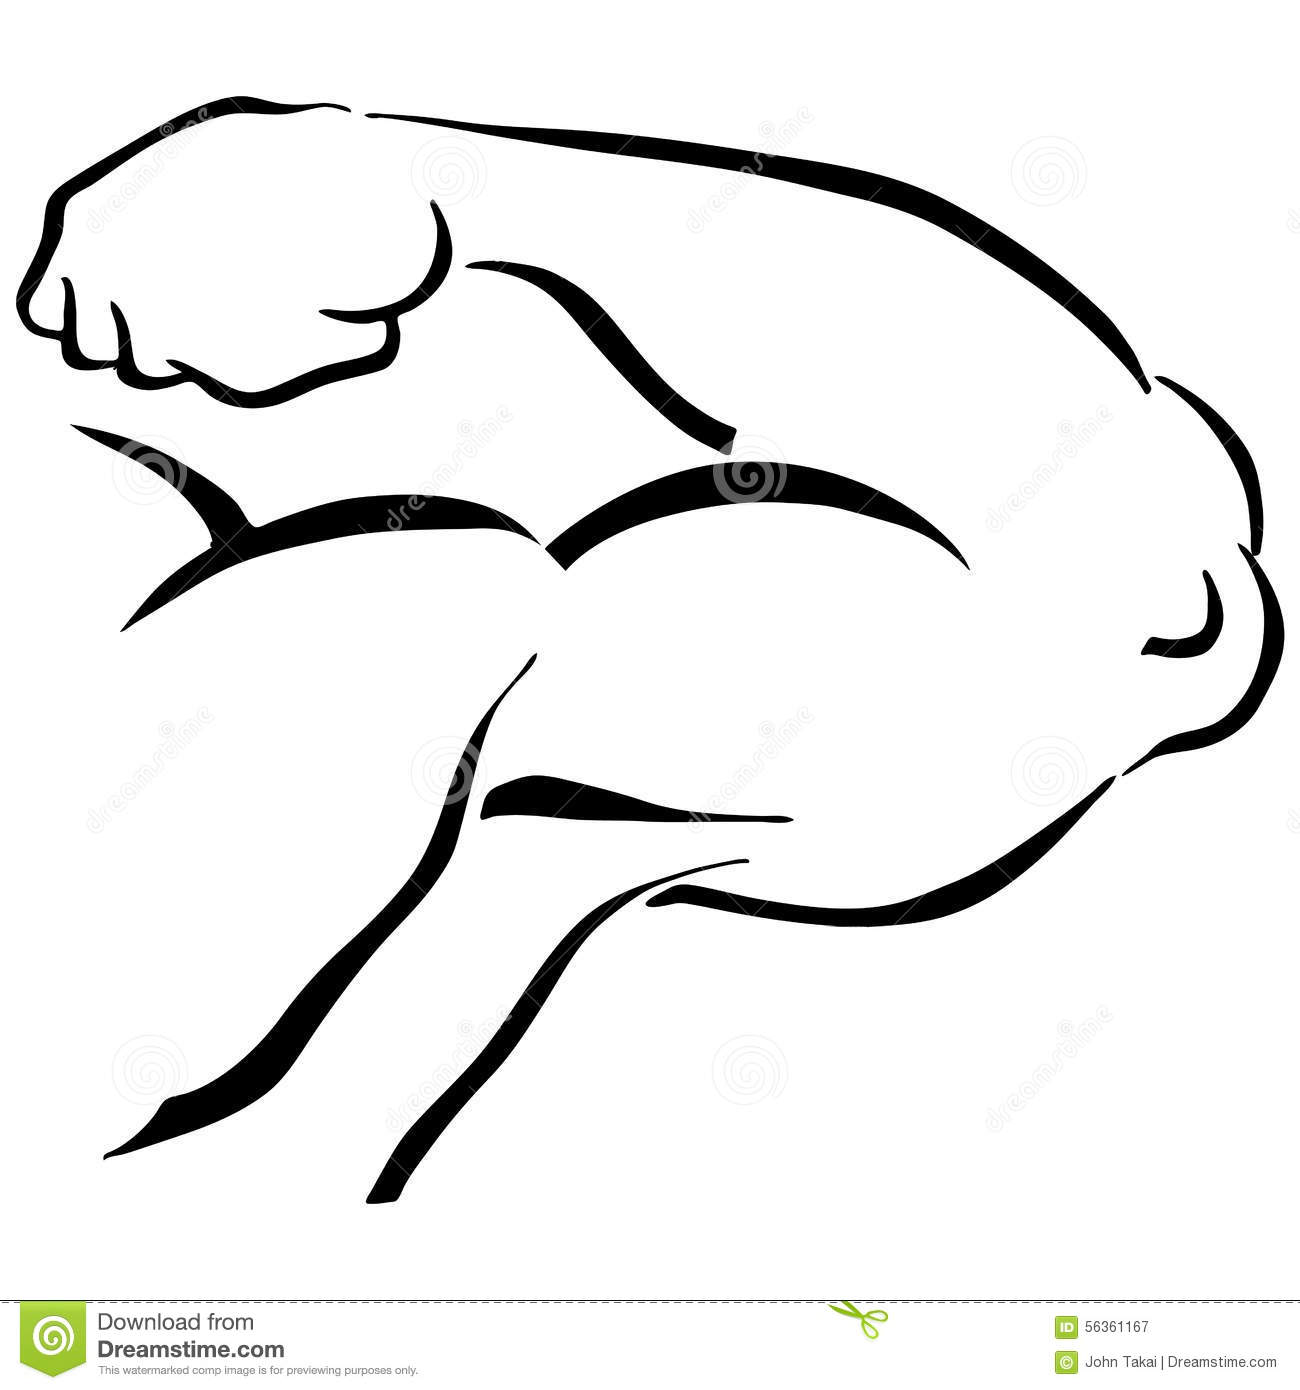 Bicep clipart flexed arm. Mussel flexing pencil and